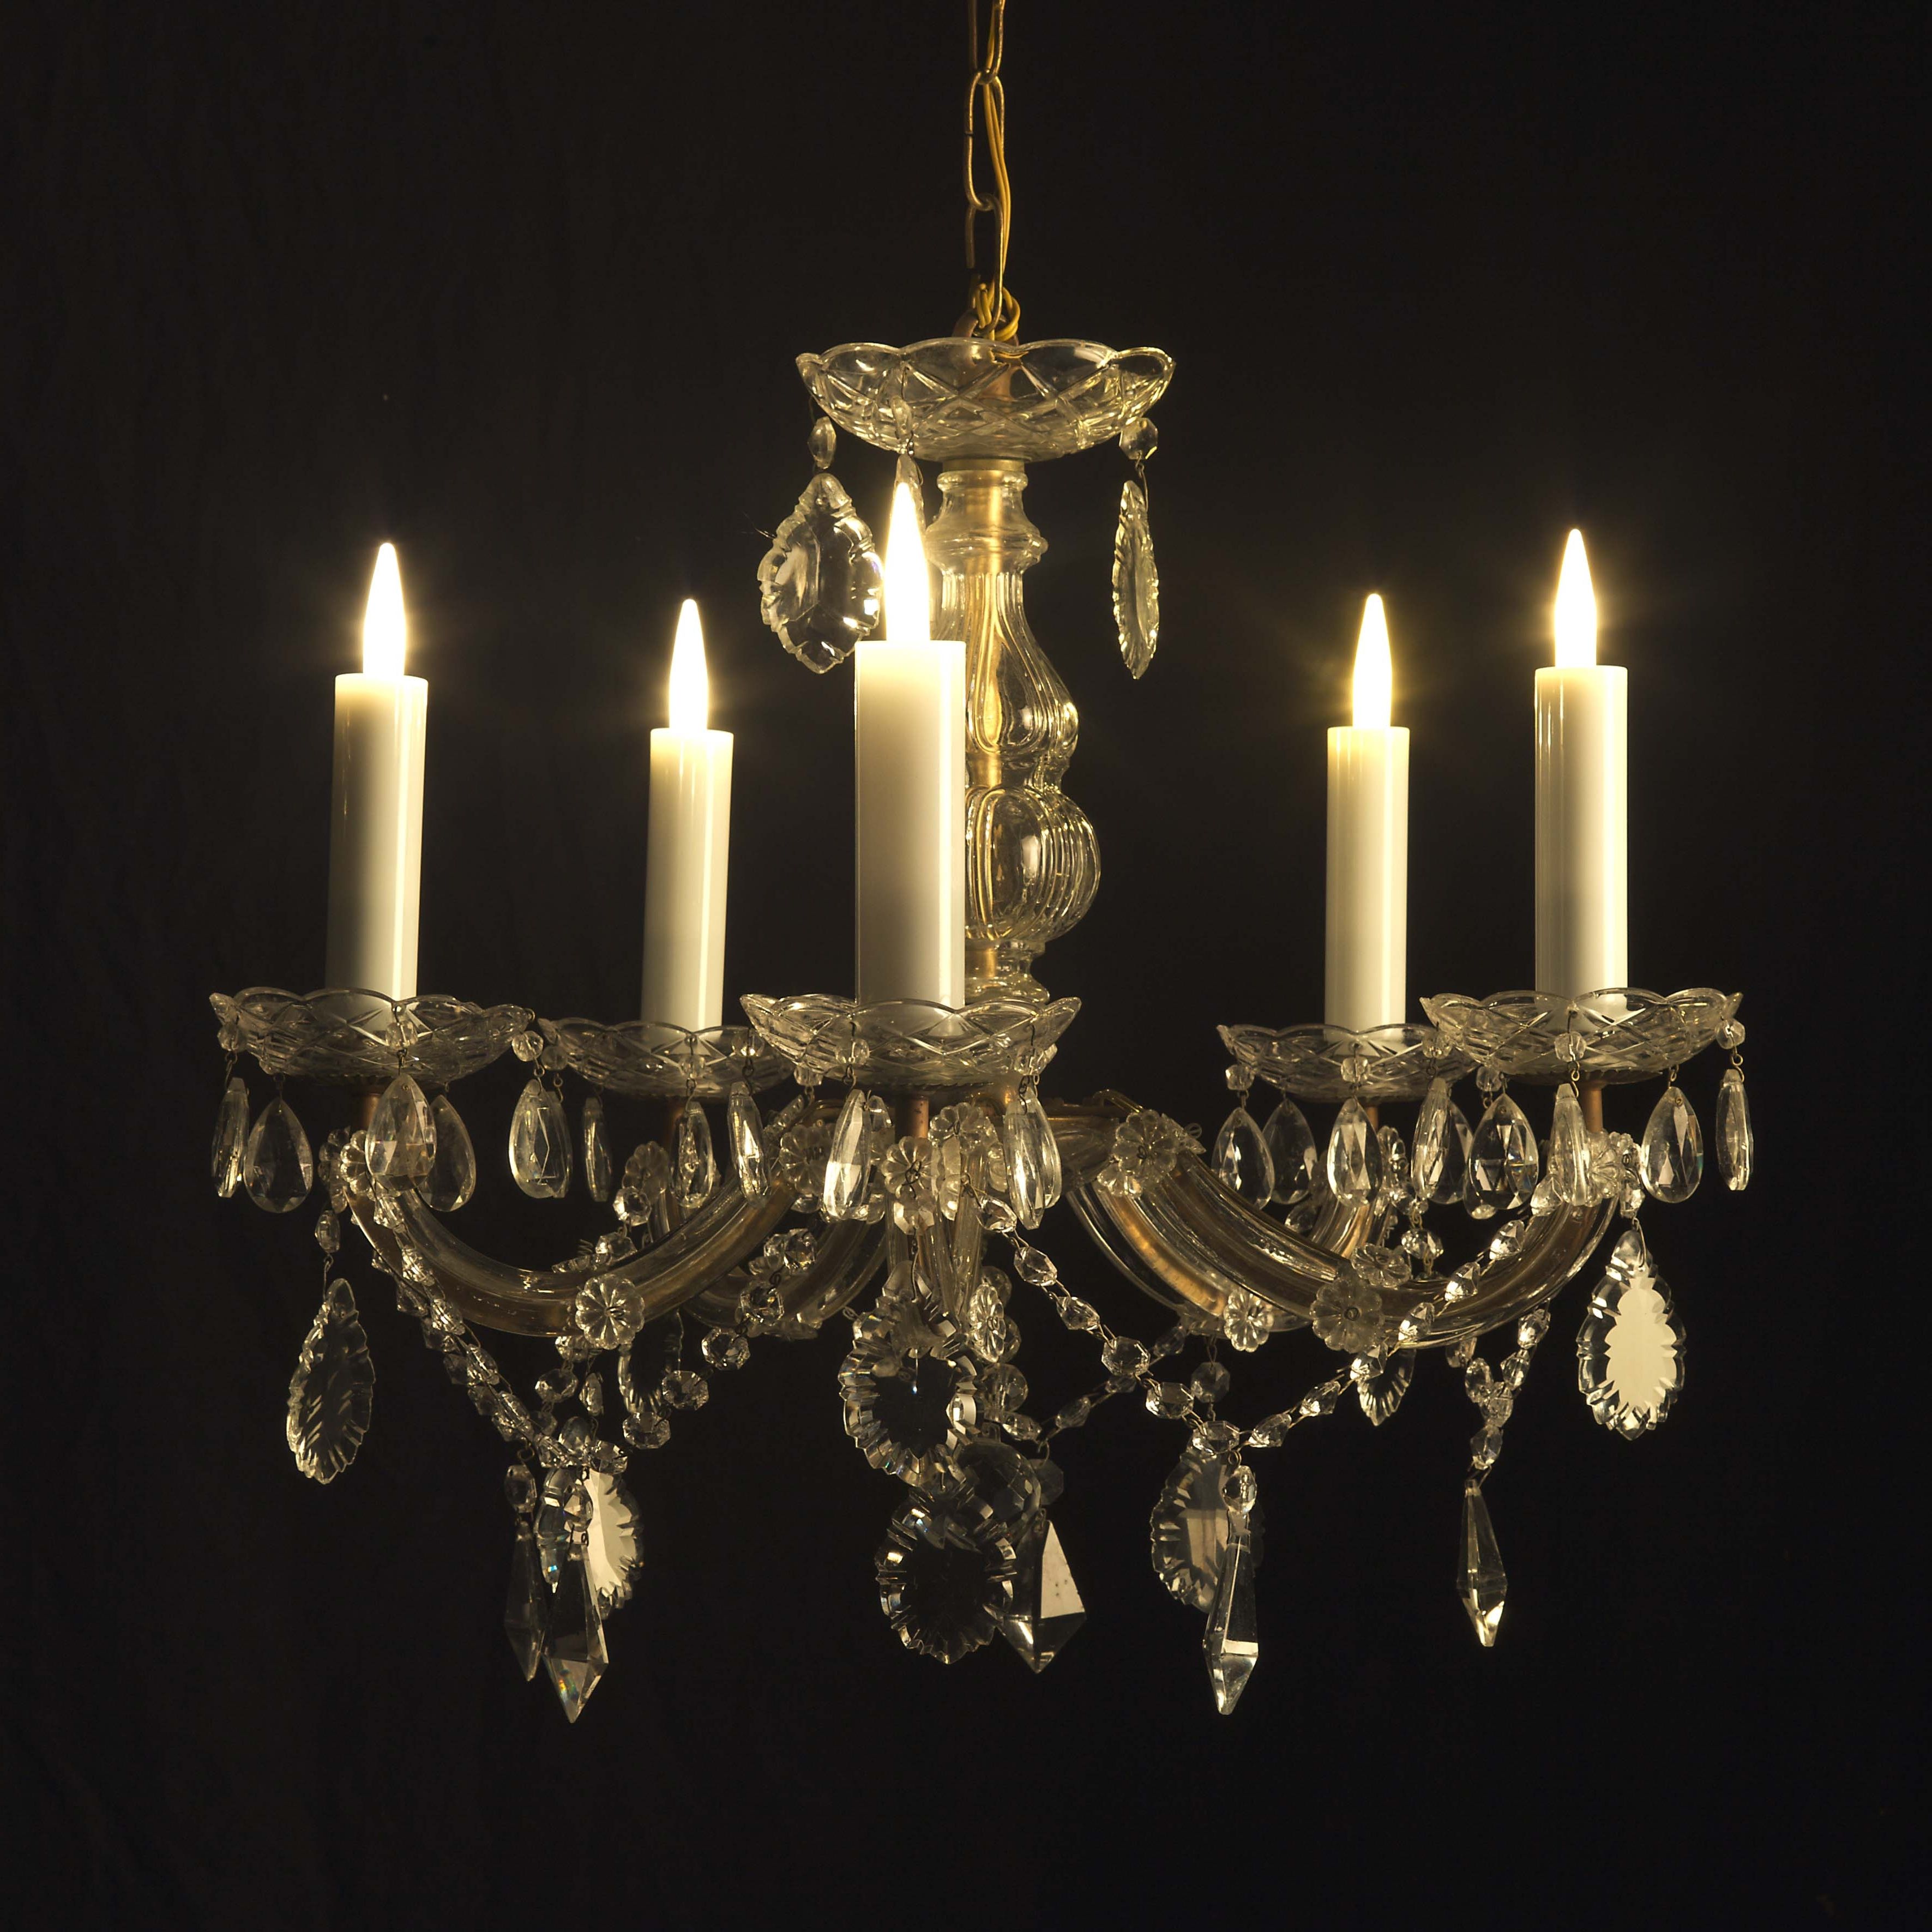 2019 Home Design : Exquisite Led Candle Chandelier Kevin Reilly Altar Inside Led Candle Chandeliers (View 1 of 20)